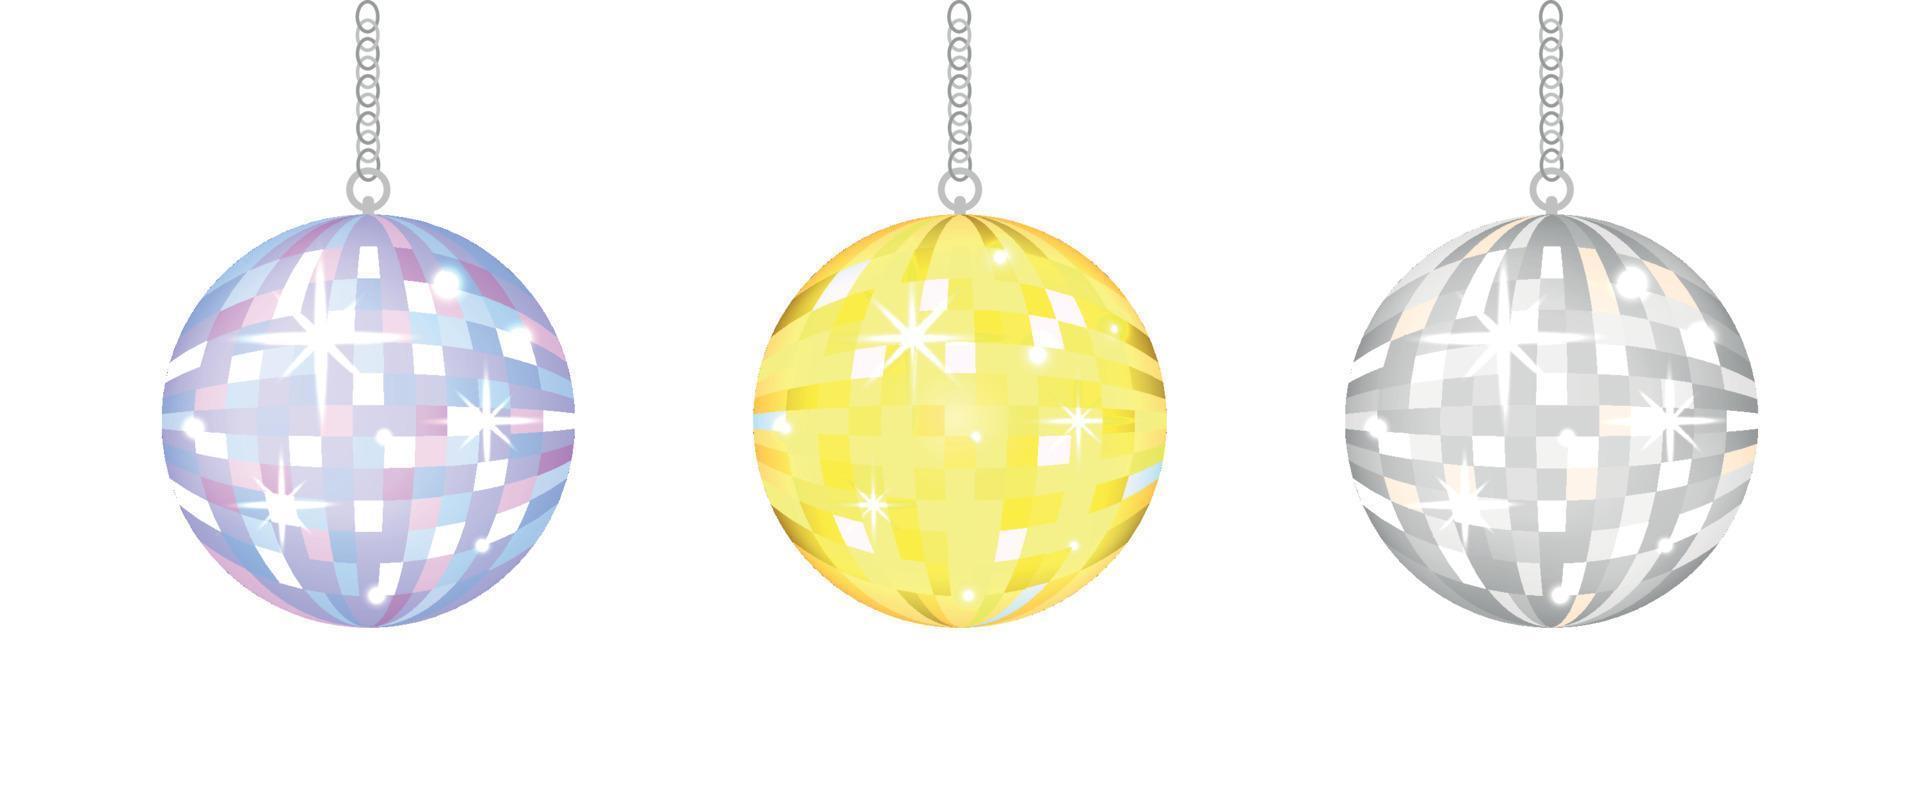 Disco balls vector set. Golden, silver and blue discoballs isolated. Glowing graphic elements for party designs. Colorful shiny mirror balls on white background. 80s 90s club life concept